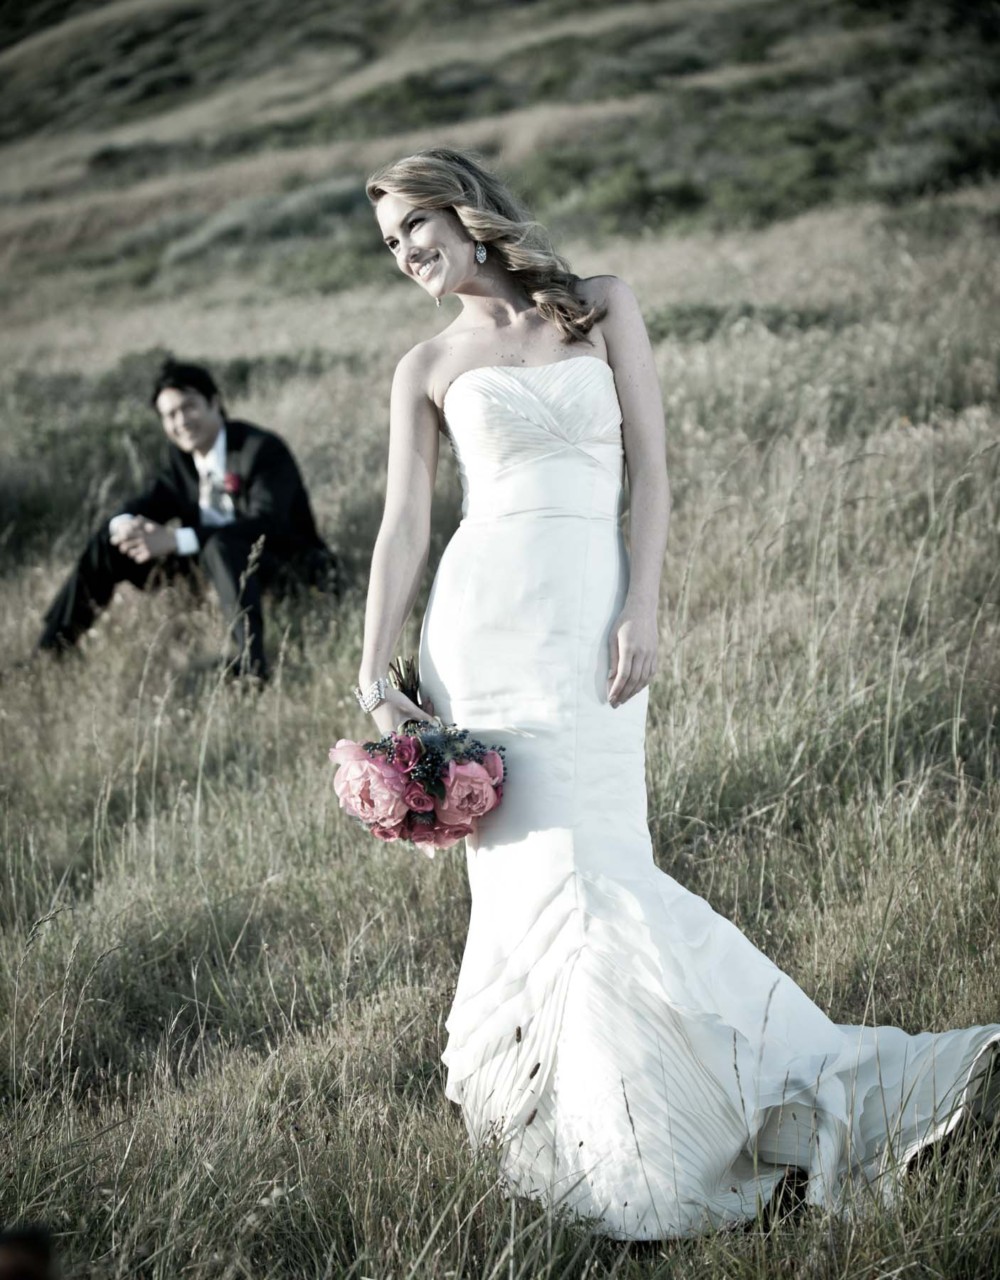 Looking for a fall wedding photographer in Alyeska?